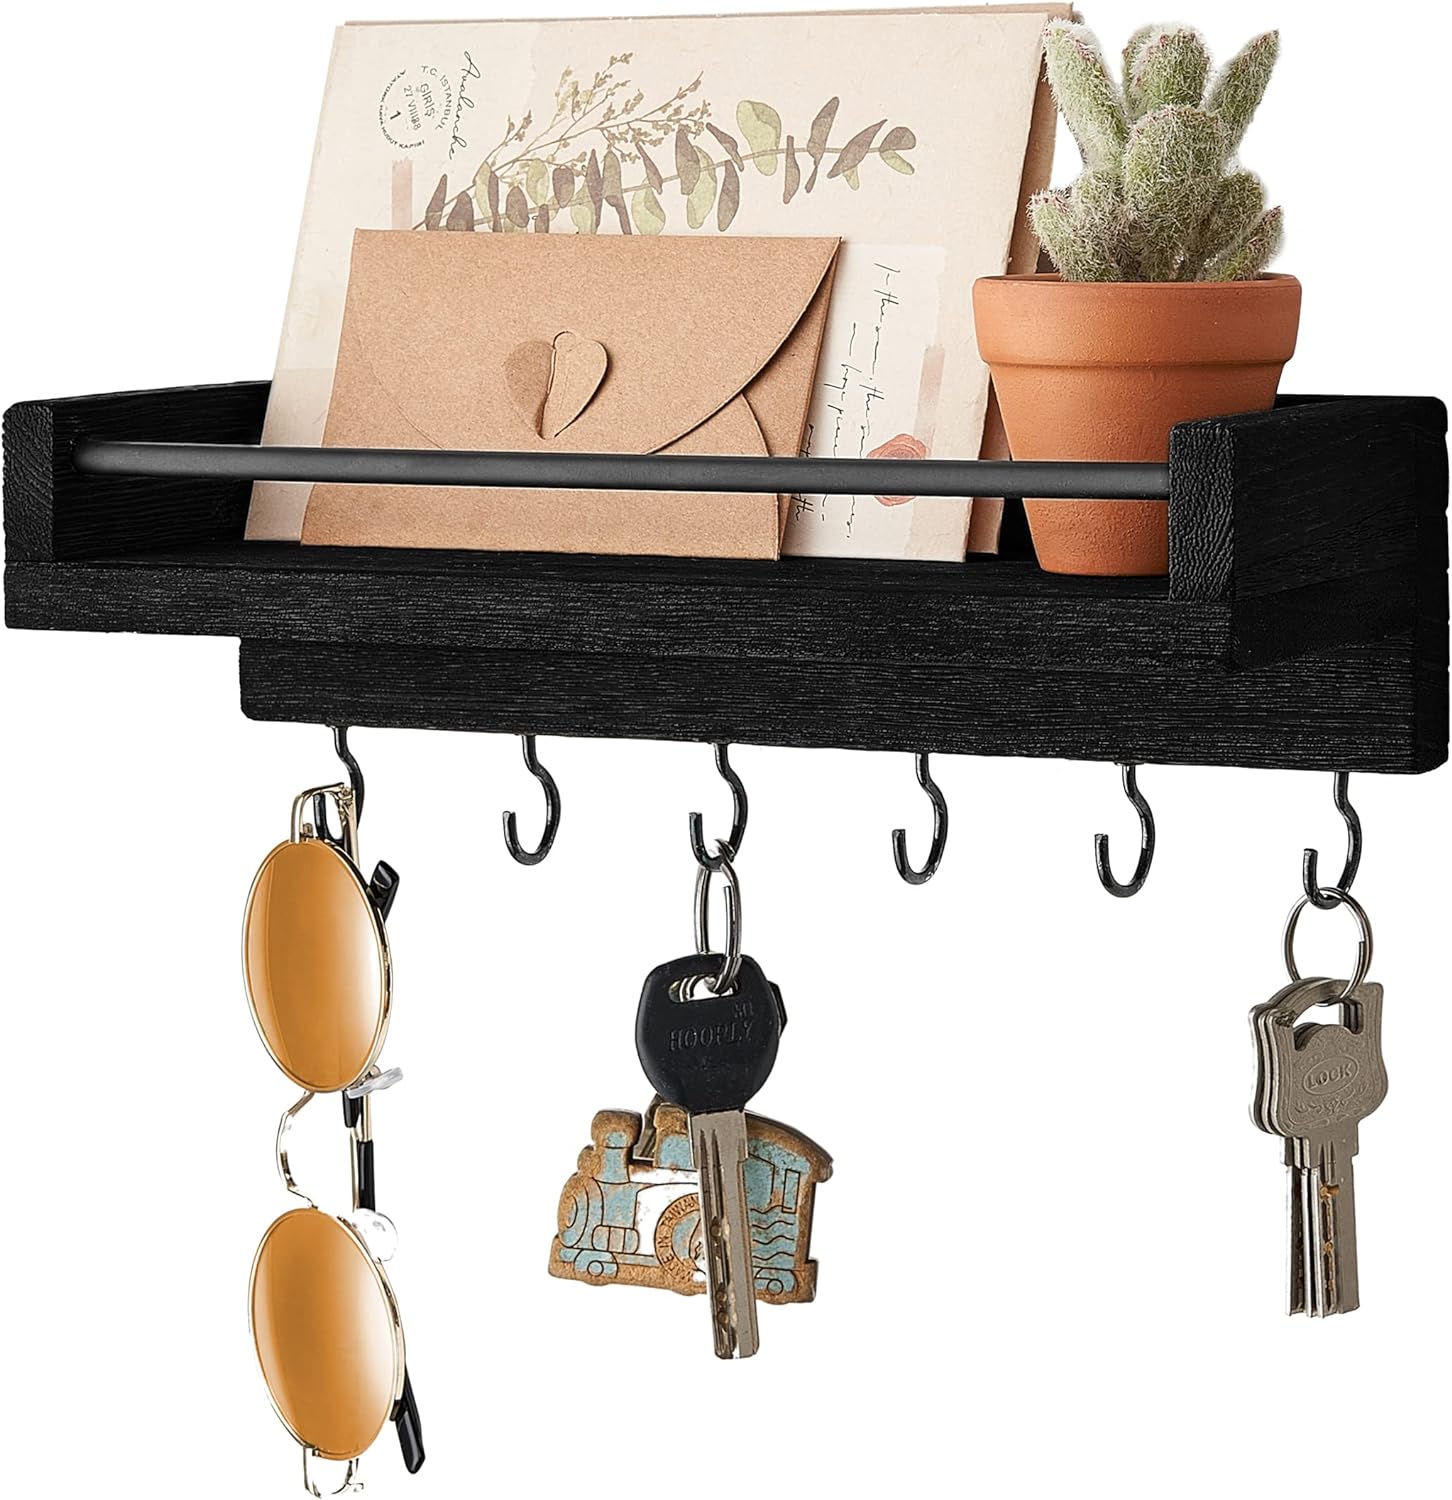 Mkono Key Holder for Wall, 9.5 x 3.5 x 2.5 Small Black Wood Floating Shelf with 6 Hooks Decorative Display Key Hanger for Living Room, Entryway, Bedroom, Bathroom,Office, Rustic Home Decor